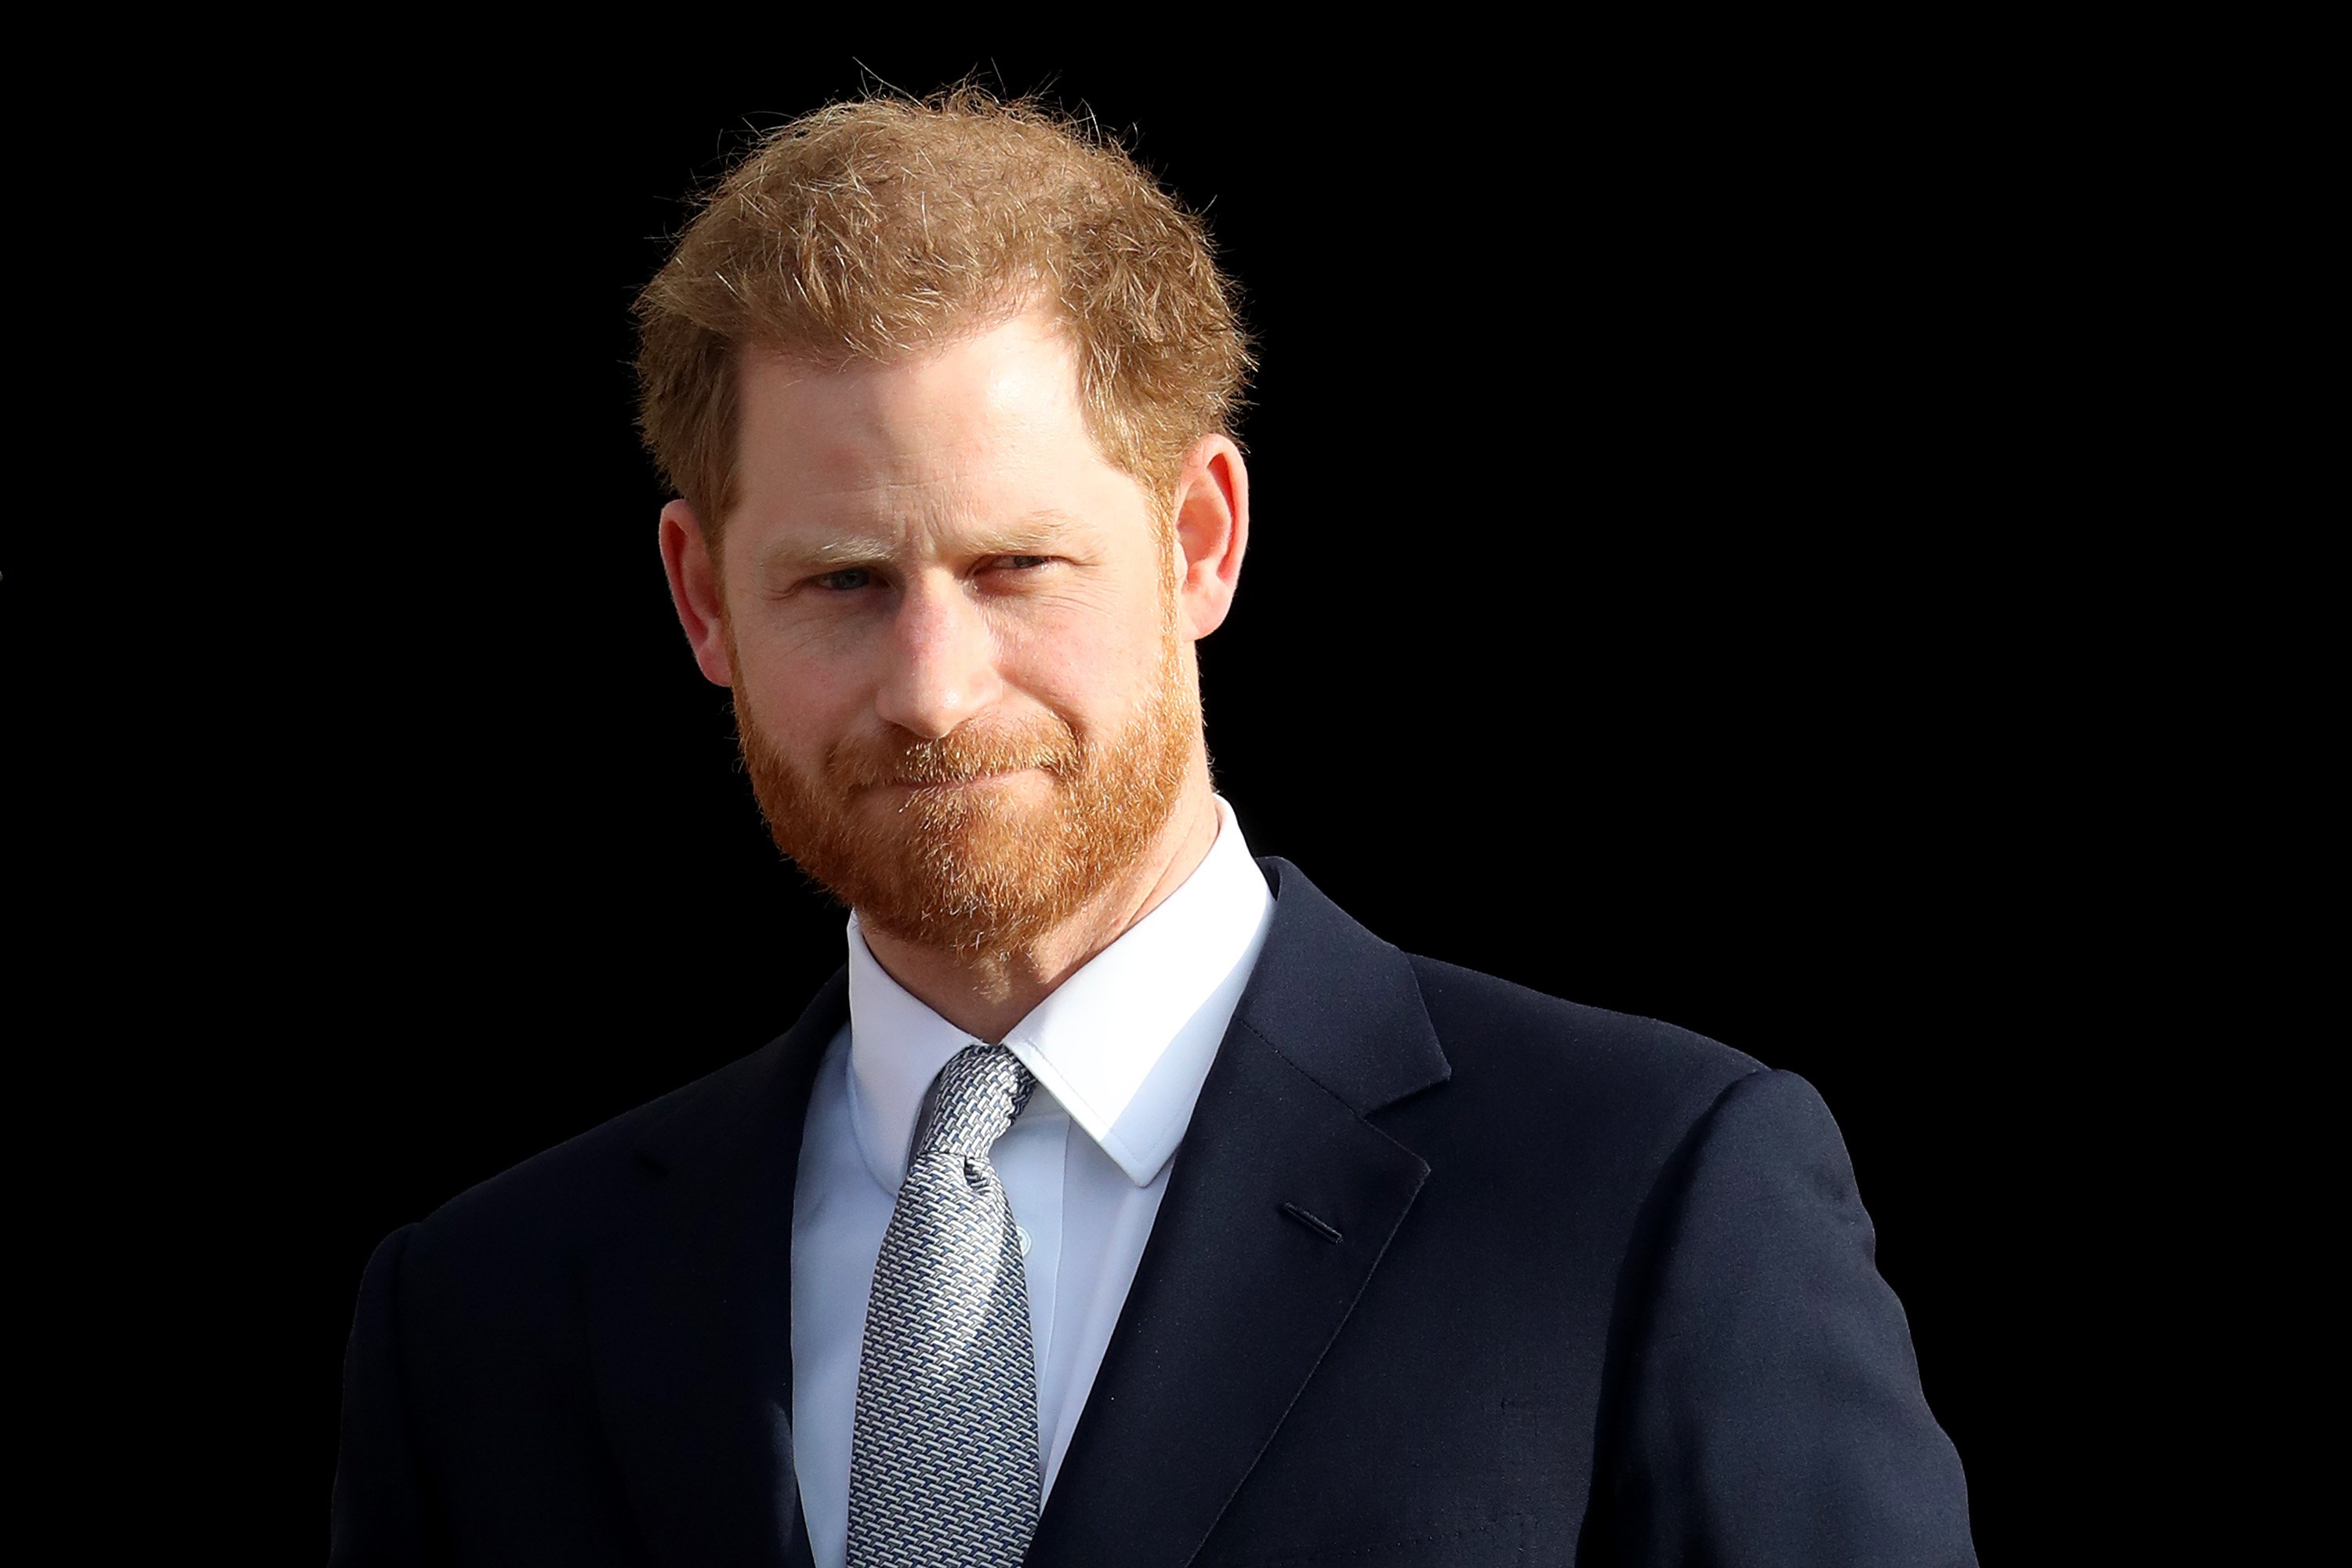 Prince Harry poses in a dark suit.